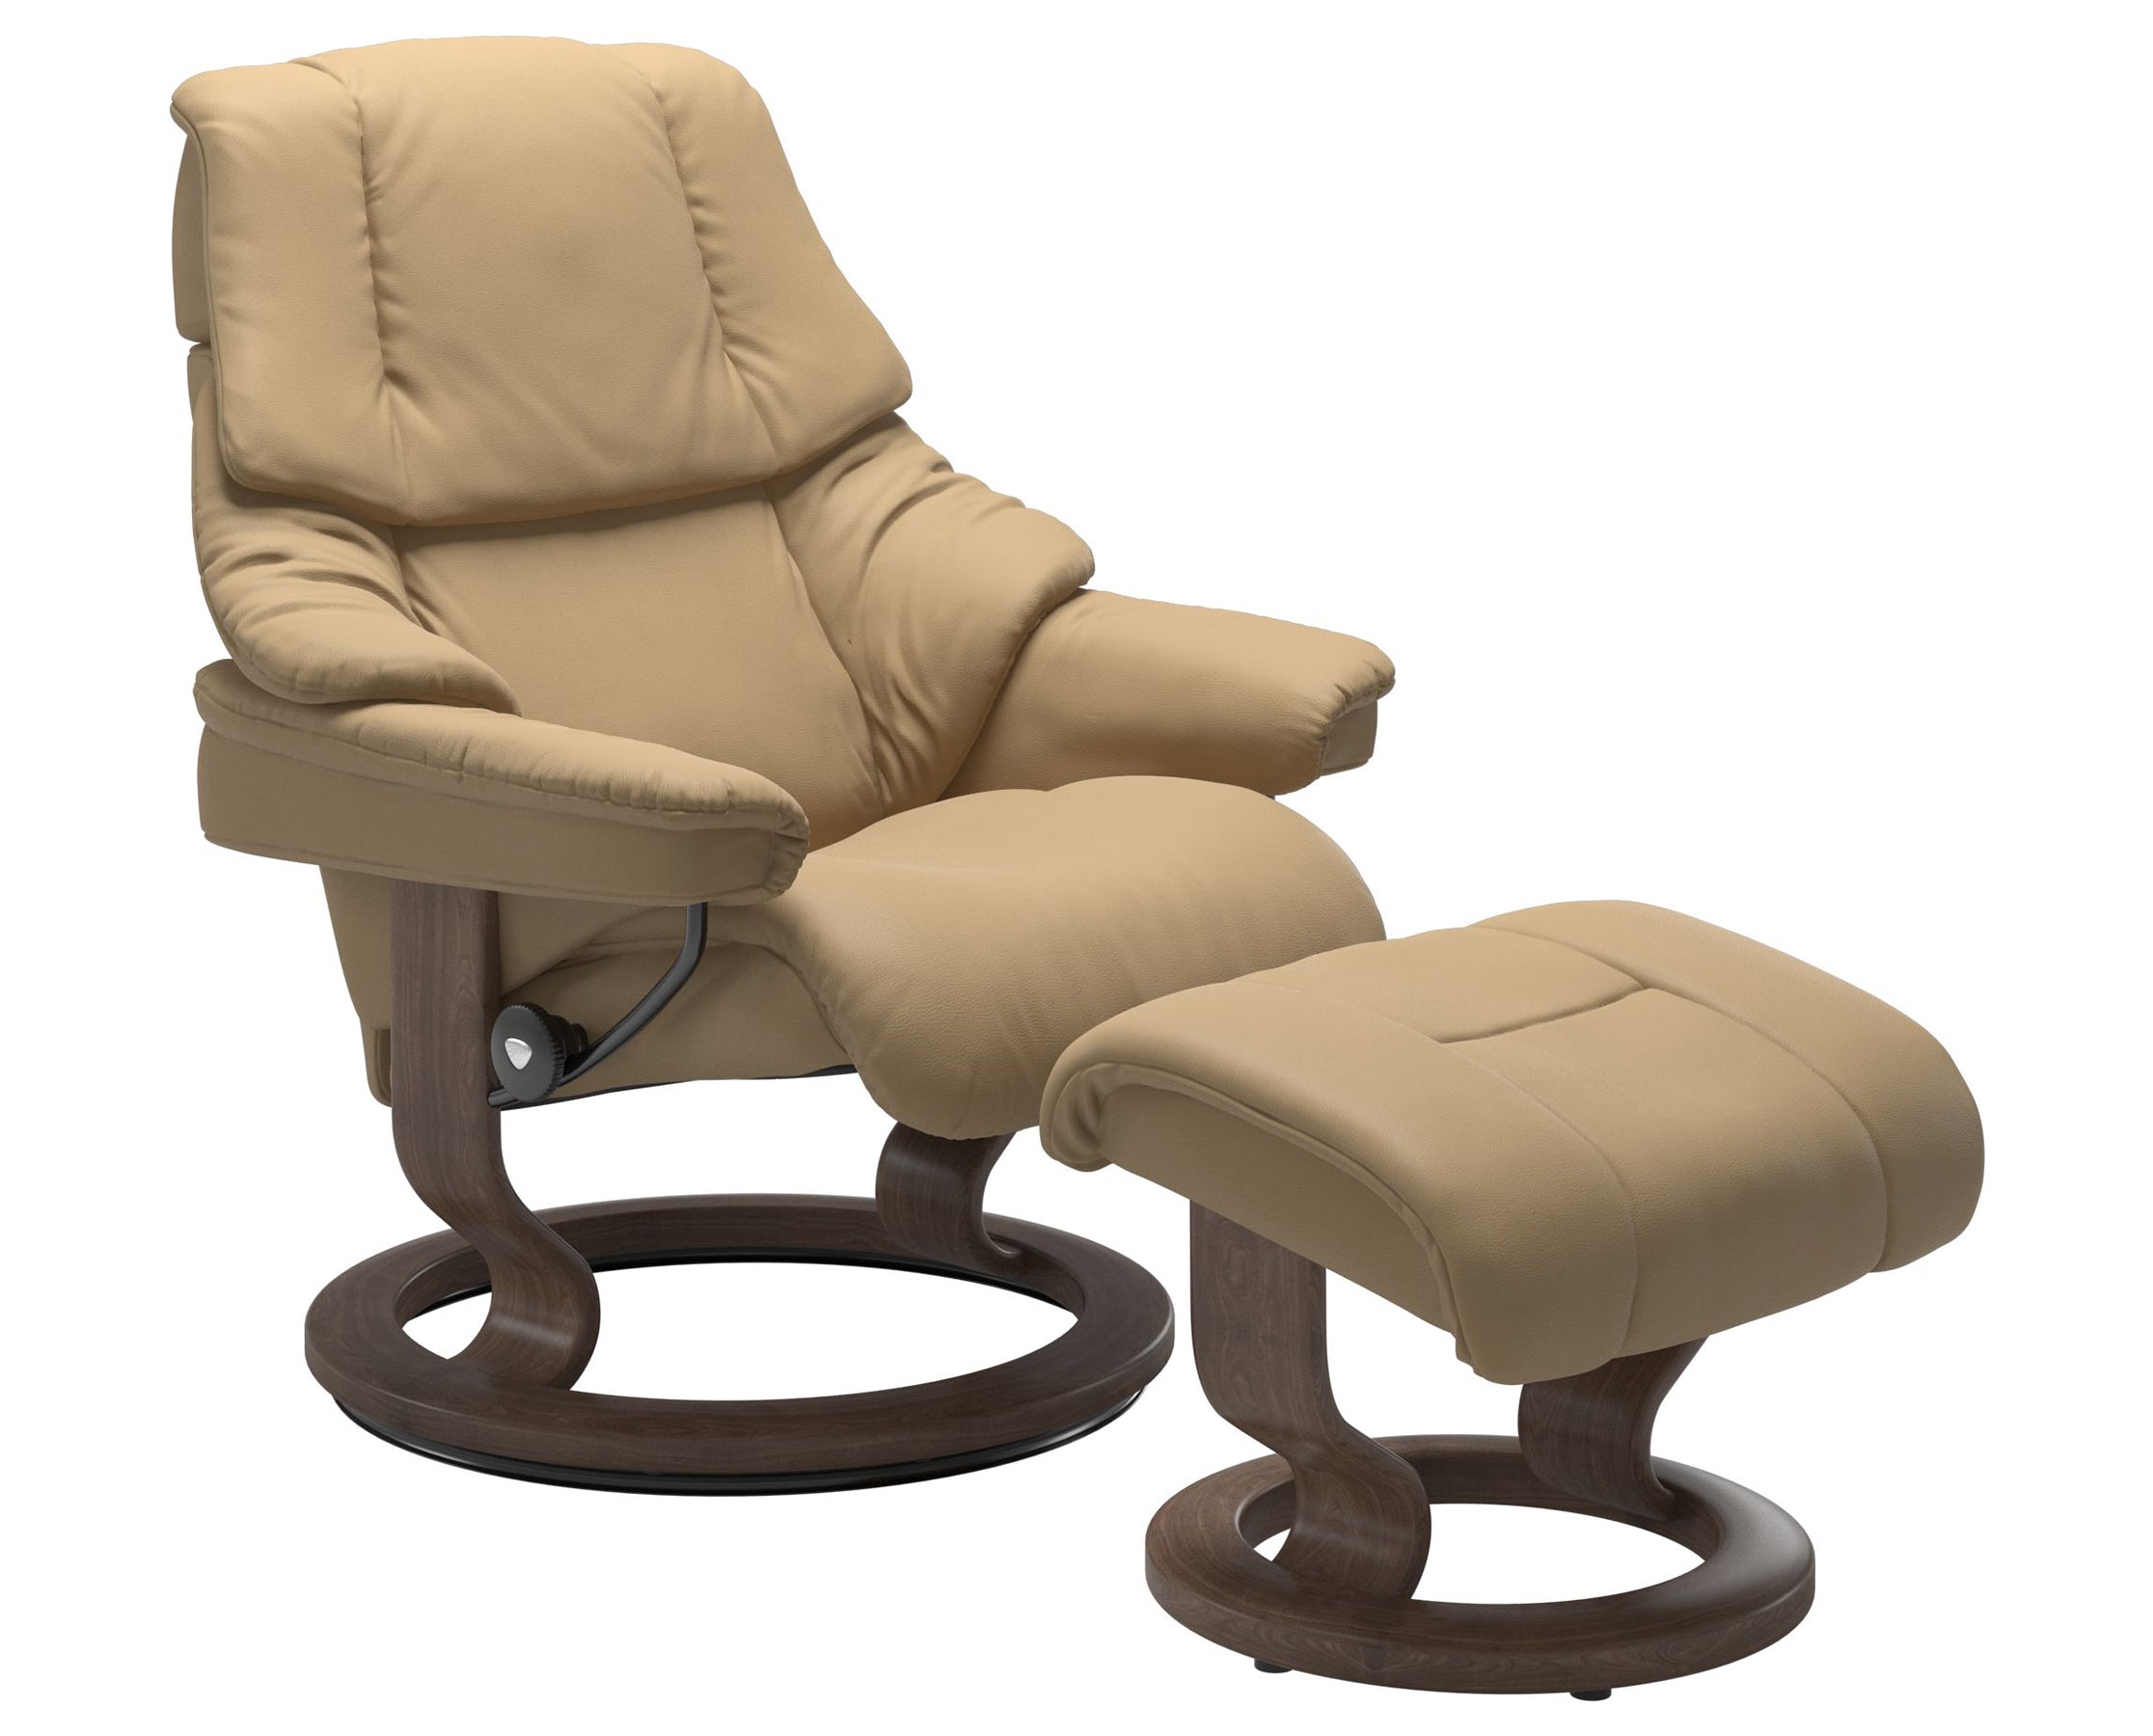 Paloma Leather Sand S/M/L and Walnut Base | Stressless Reno Classic Recliner | Valley Ridge Furniture